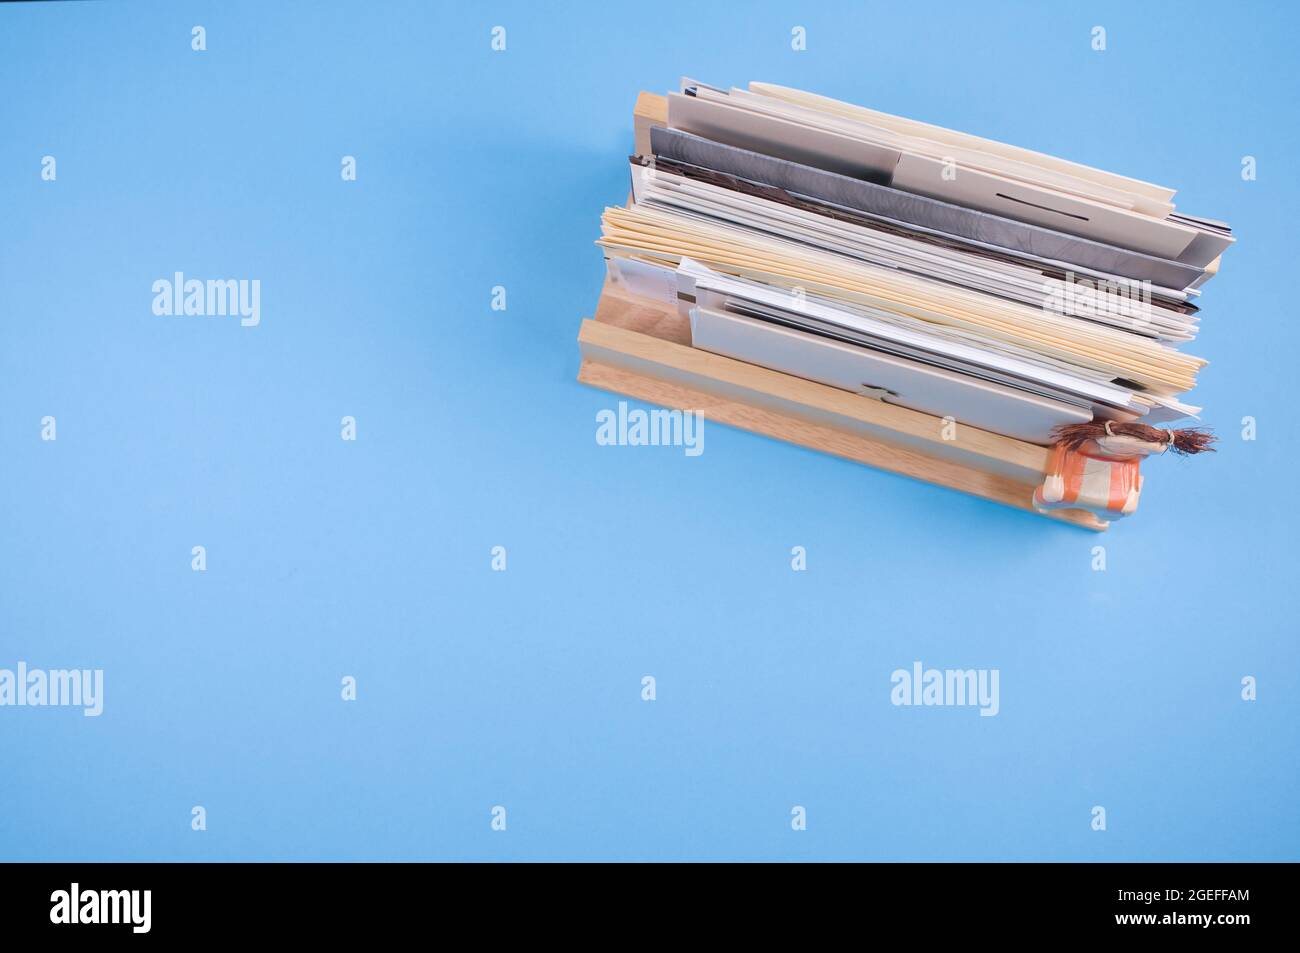 Top view of a small wooden letter holder isolated on a blue background Stock Photo